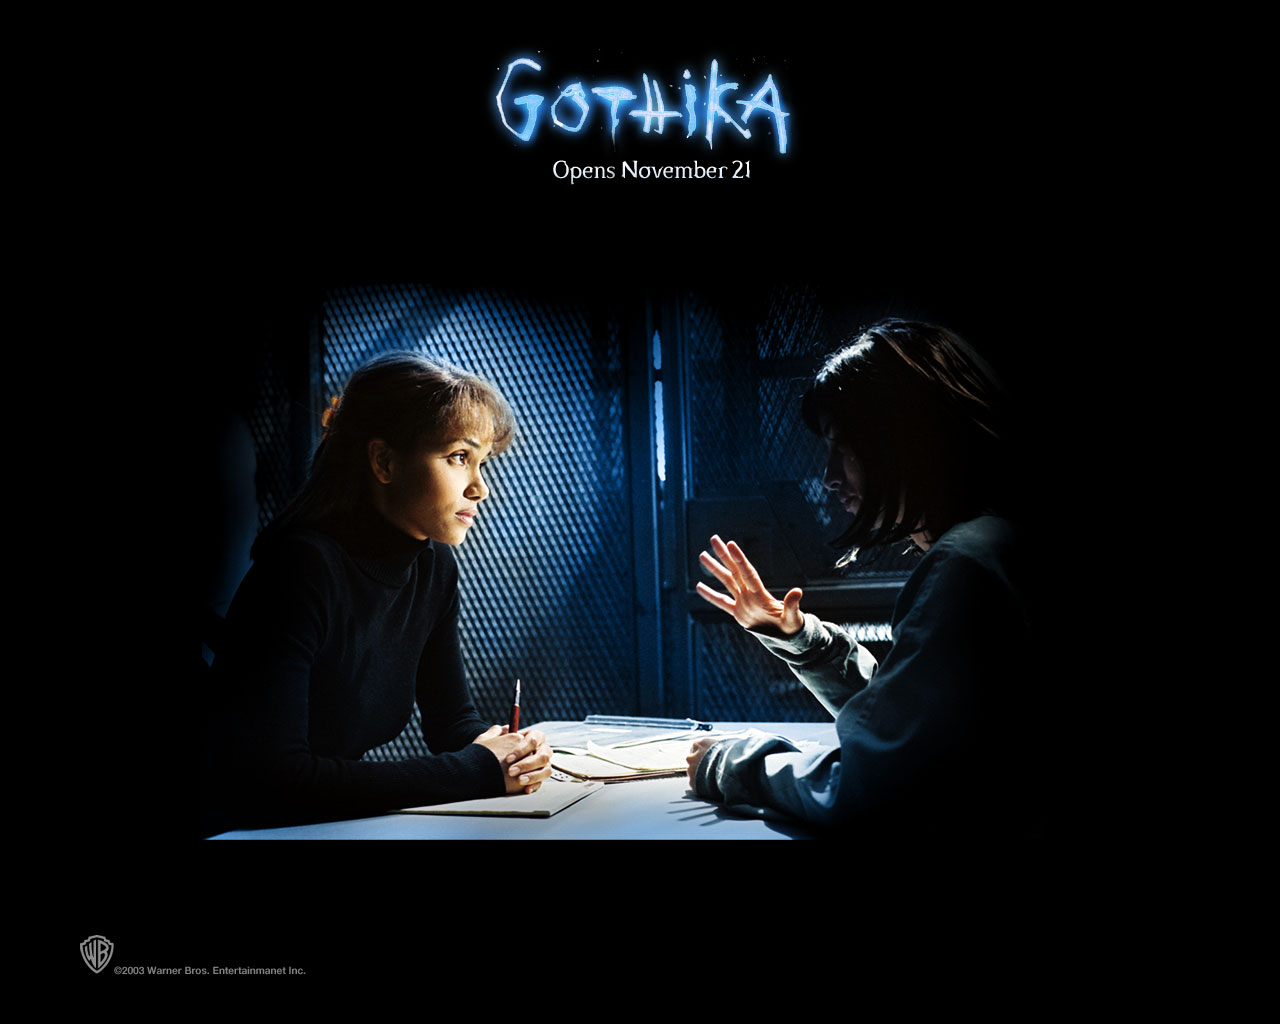 Download full size Gothika wallpaper / Movies / 1280x1024